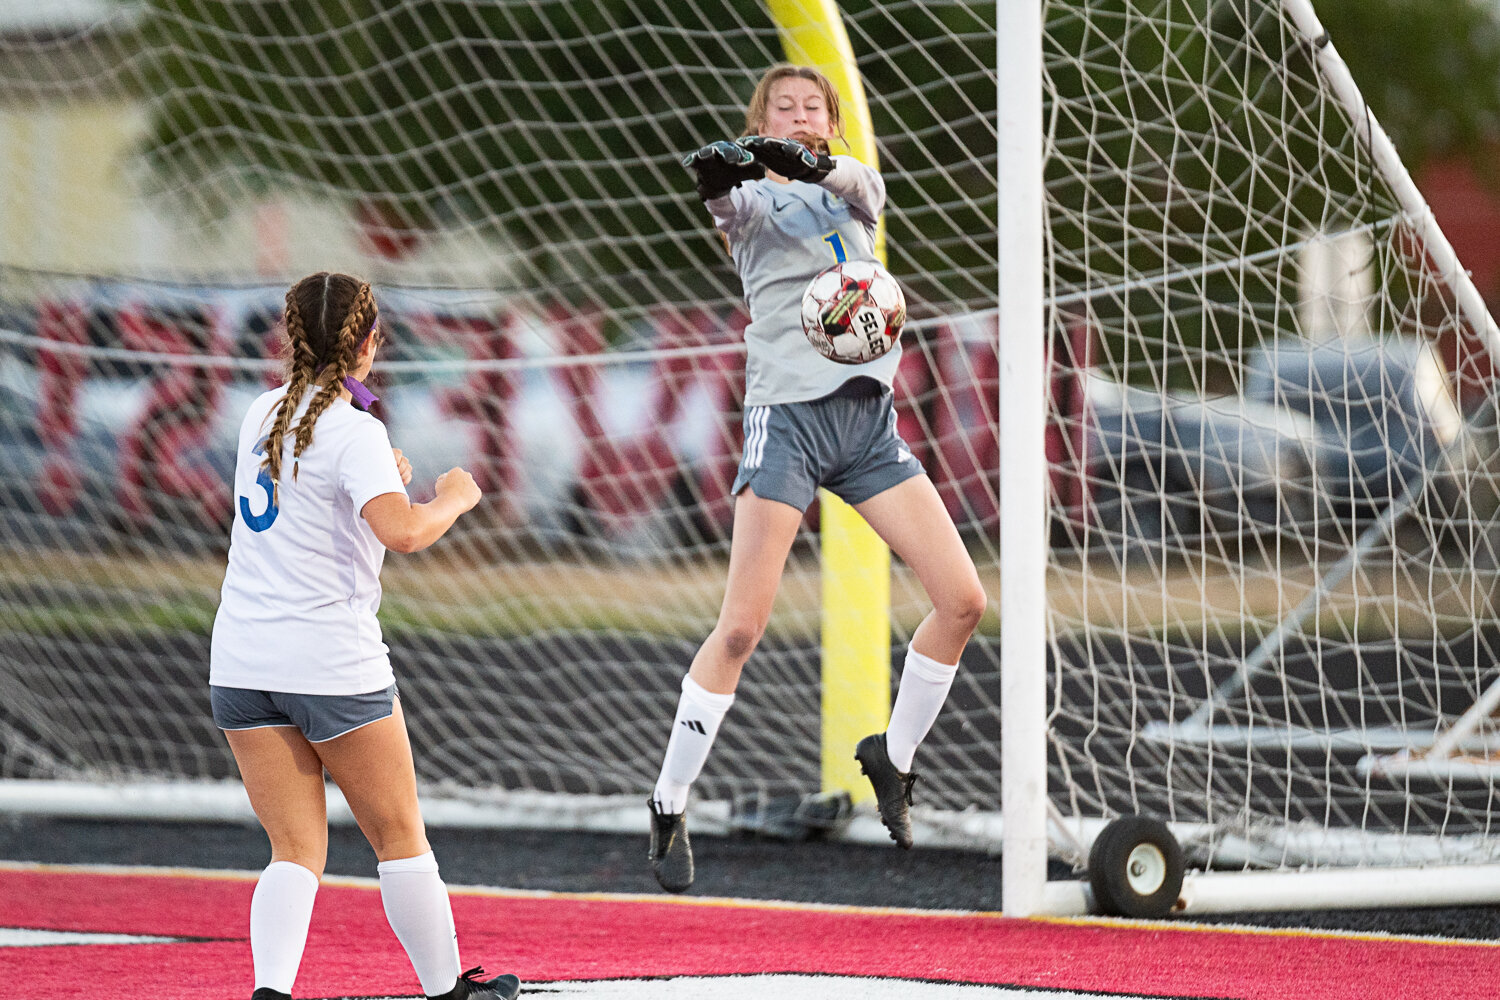 Adna keeper Jordanne Moon makes a save at her near post during the first half of 0-0 draw between the Pirates and Tenino on Sept. 14 at Beaver Stadium.